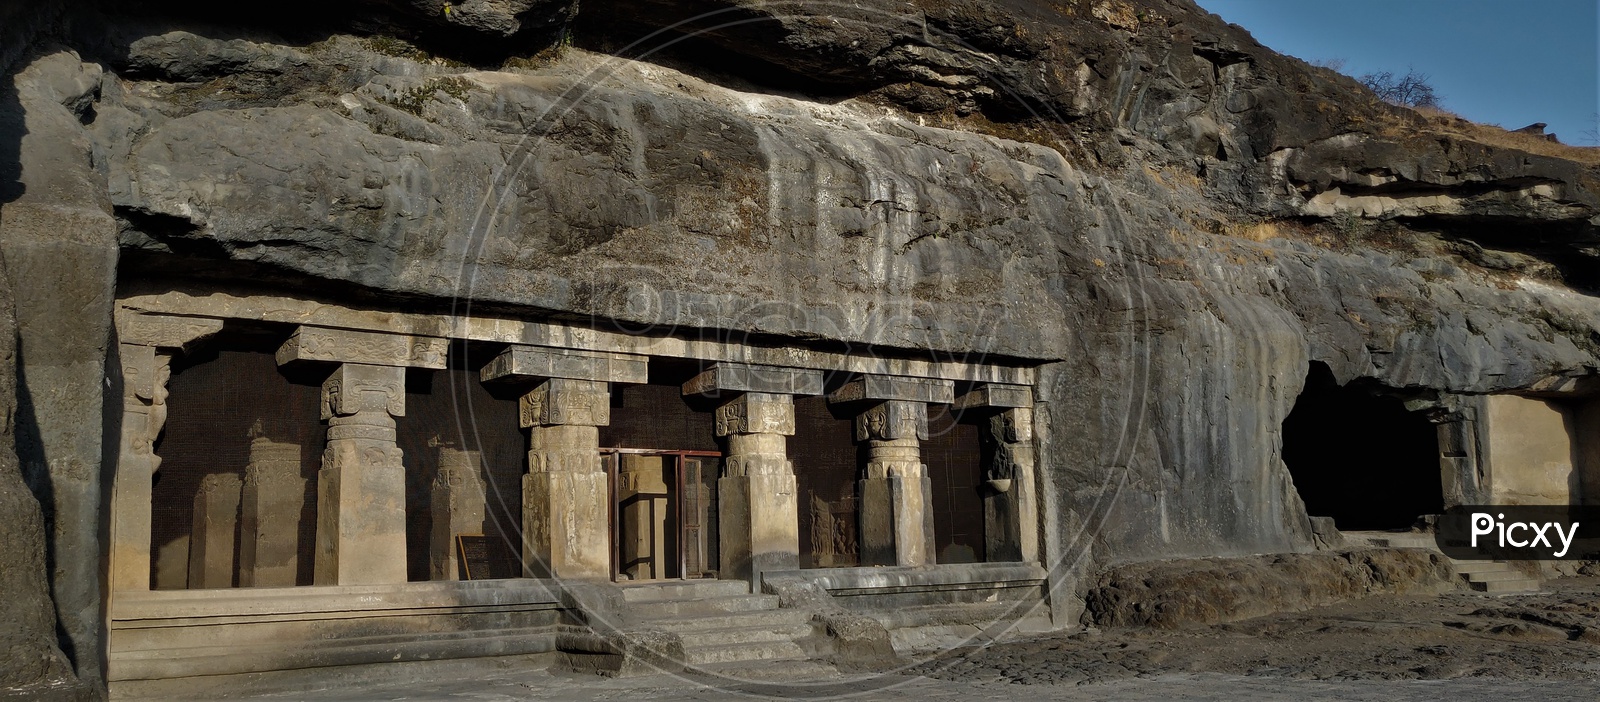 Facade View Of an Ancient Stone Carved  Buddhist Temple At Ellora Caves